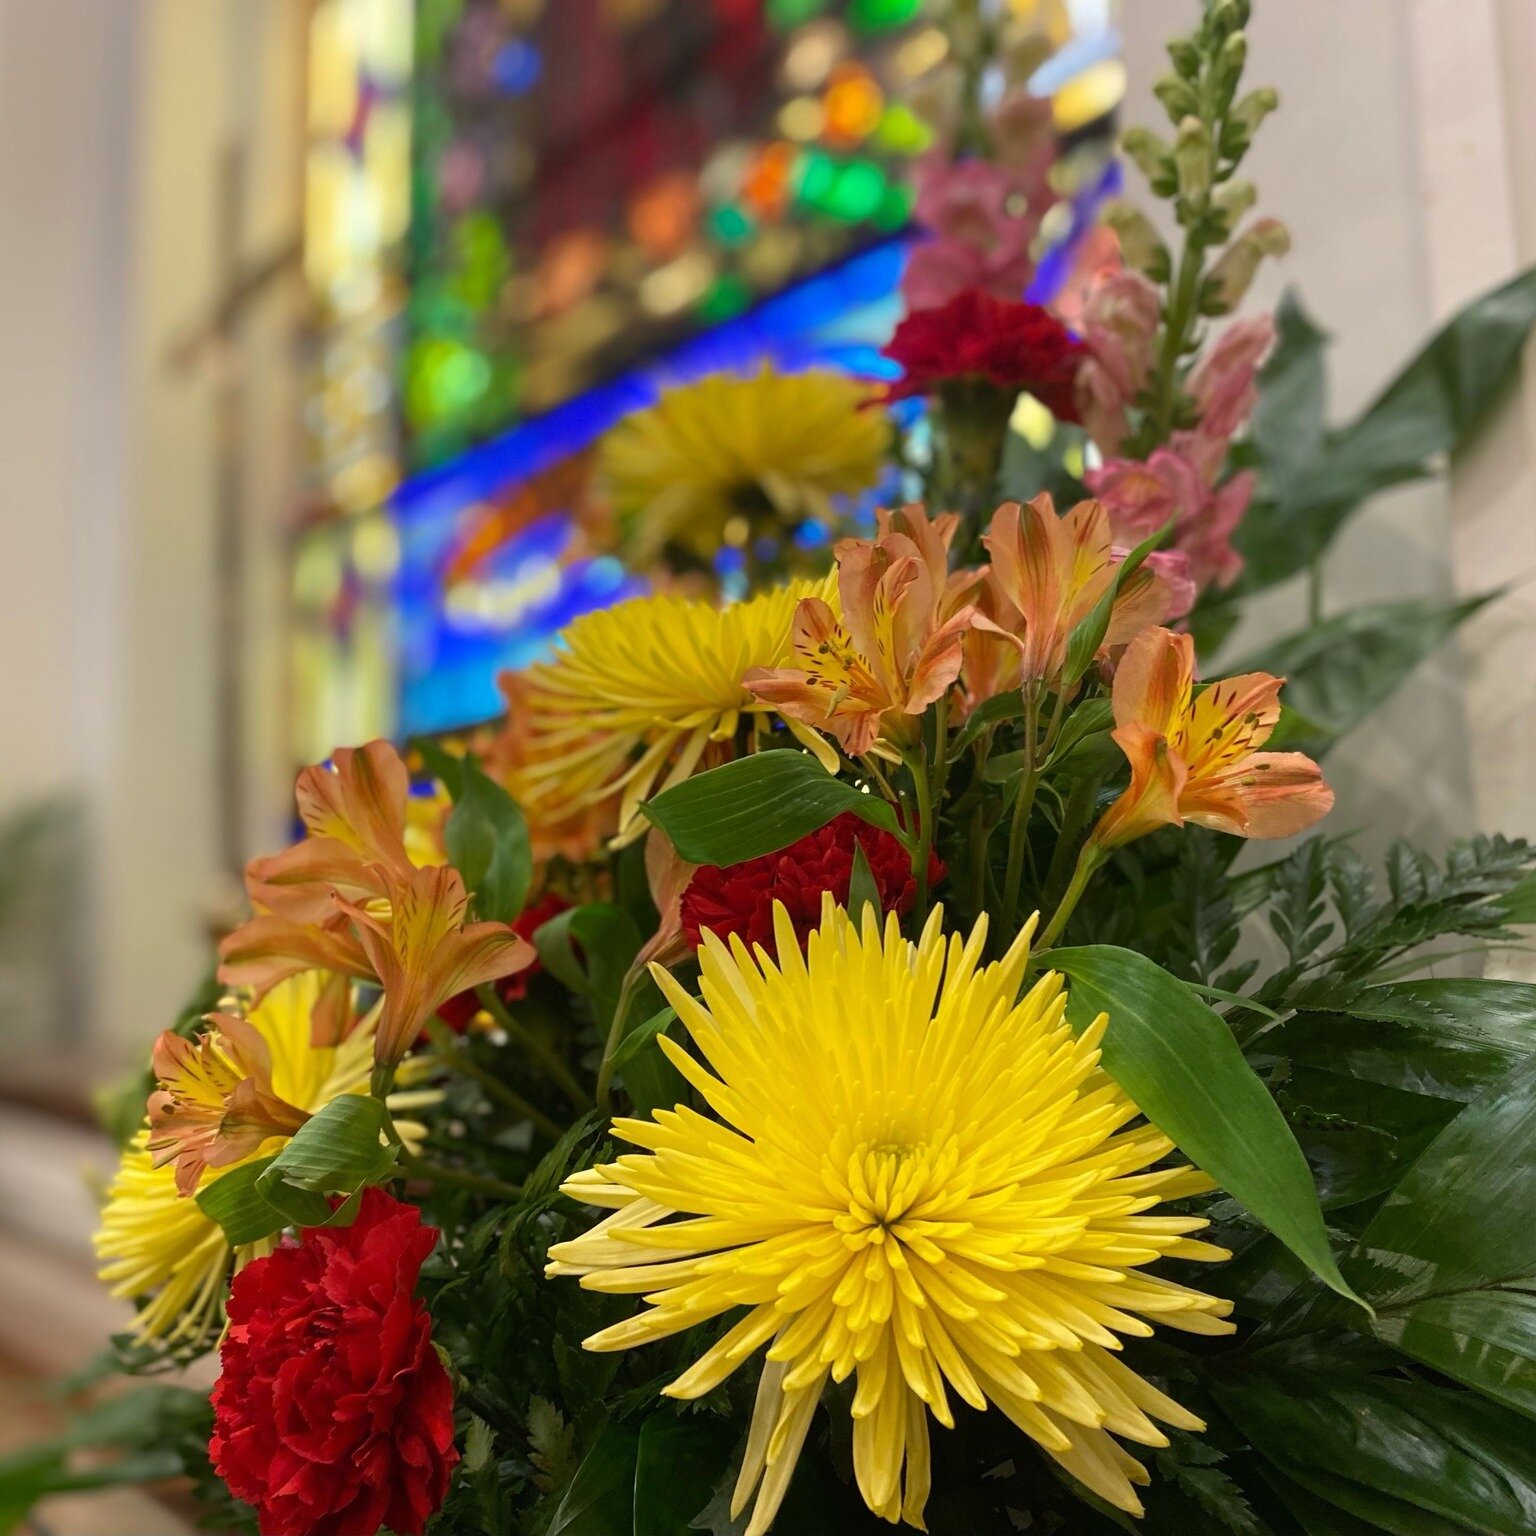 The flowers in the Chancel Sunday, February 25 are dedicated to the glory of God and were given in appreciation of Becky Charles&rsquo; long and distinguished tenure and service as Chairman of the Finance Committee.